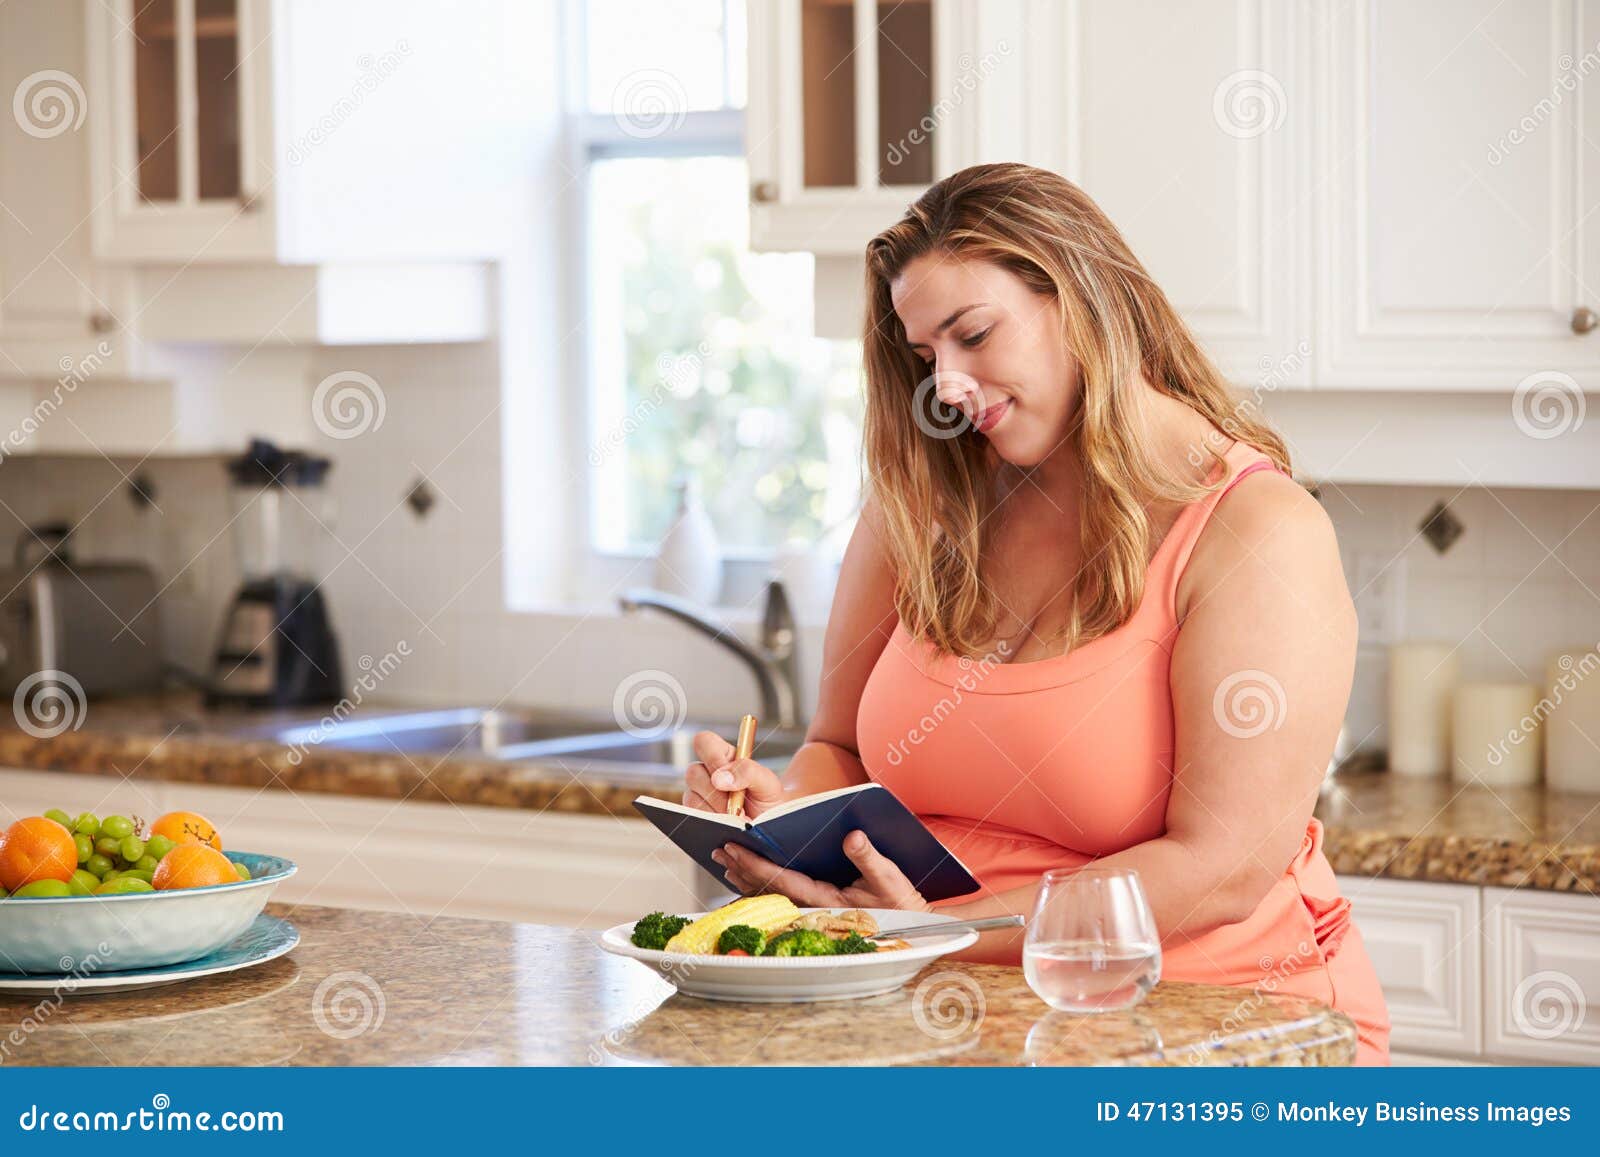 overweight woman on diet keeping food journal